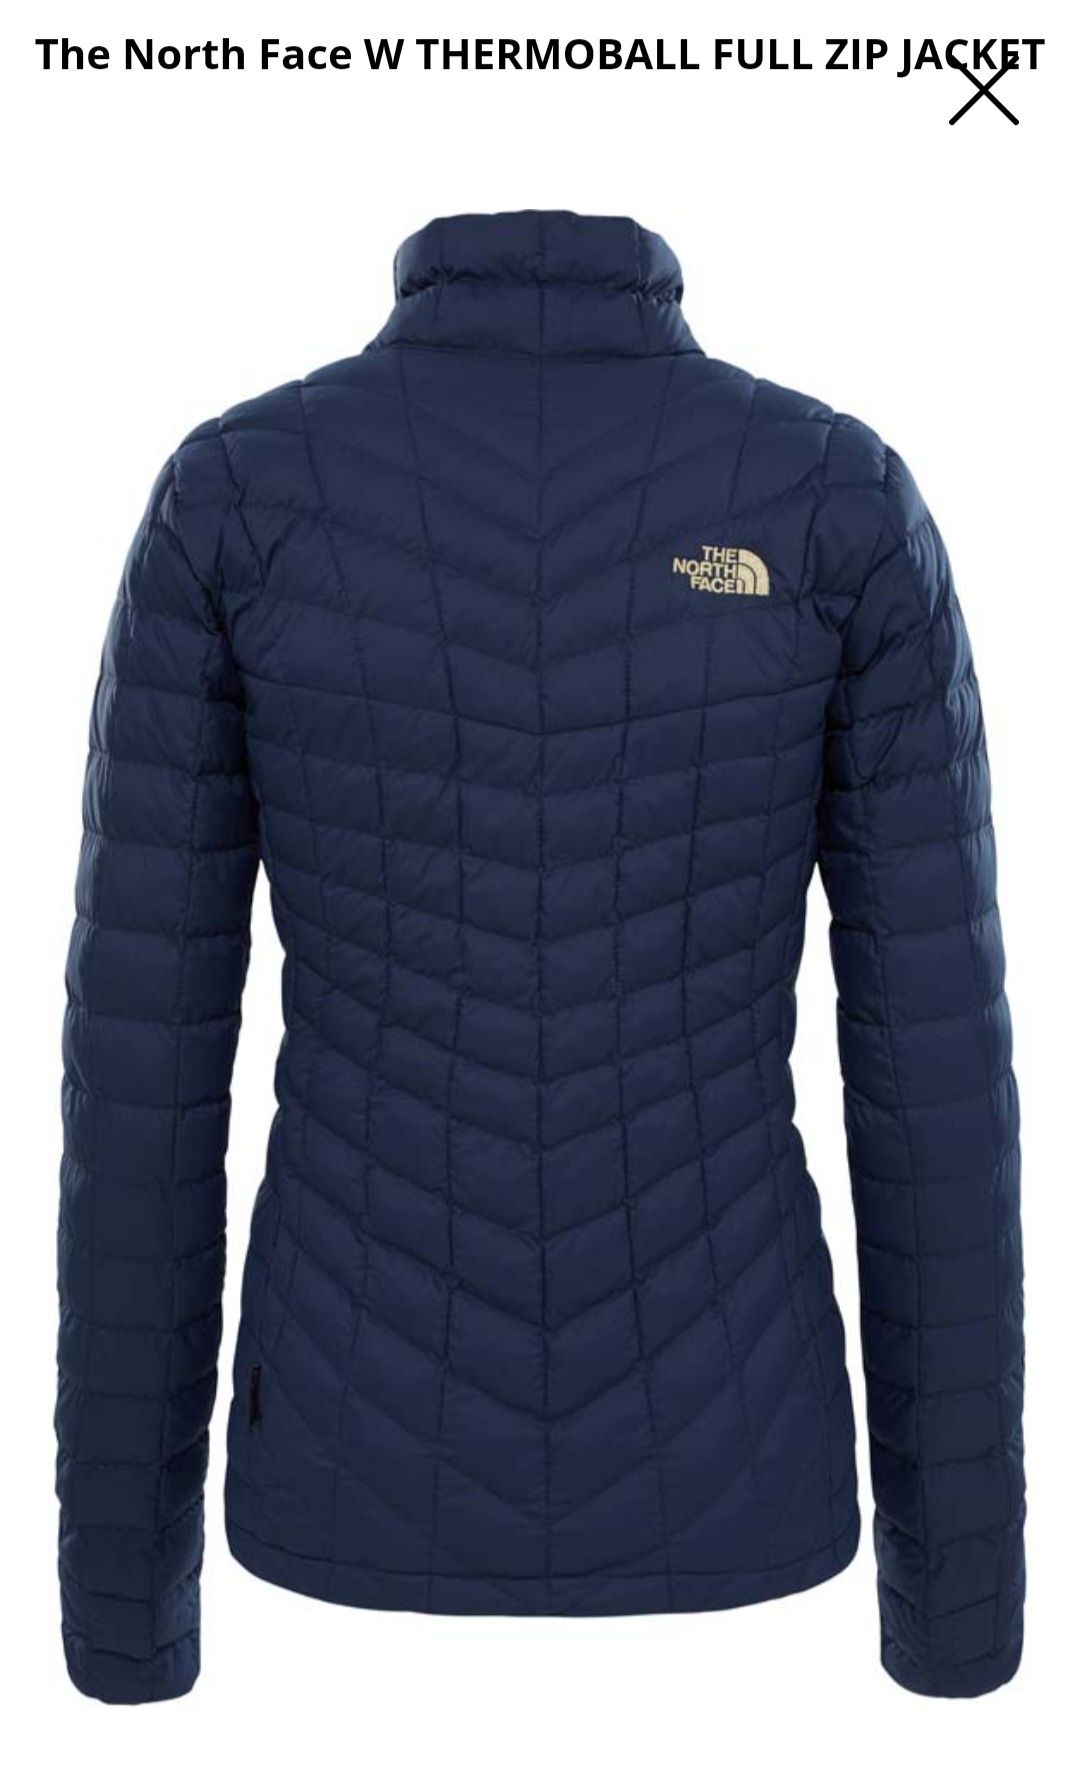 The North face Thermoball